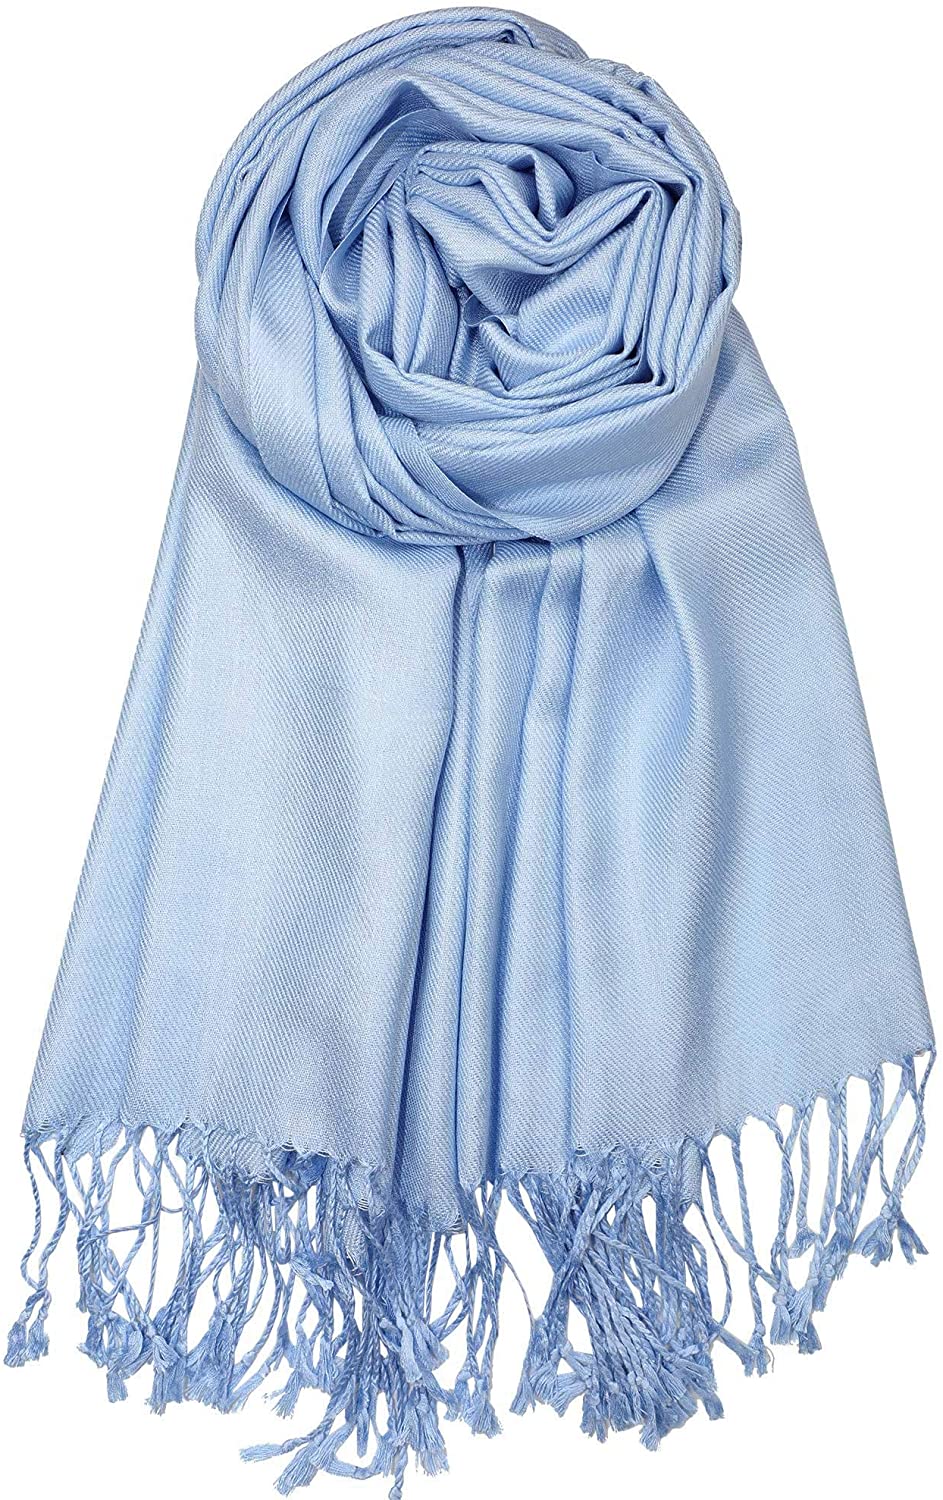 World of Shawls Handcrafted Soft Pashmina Shawl Wrap Scarf in Solid Co